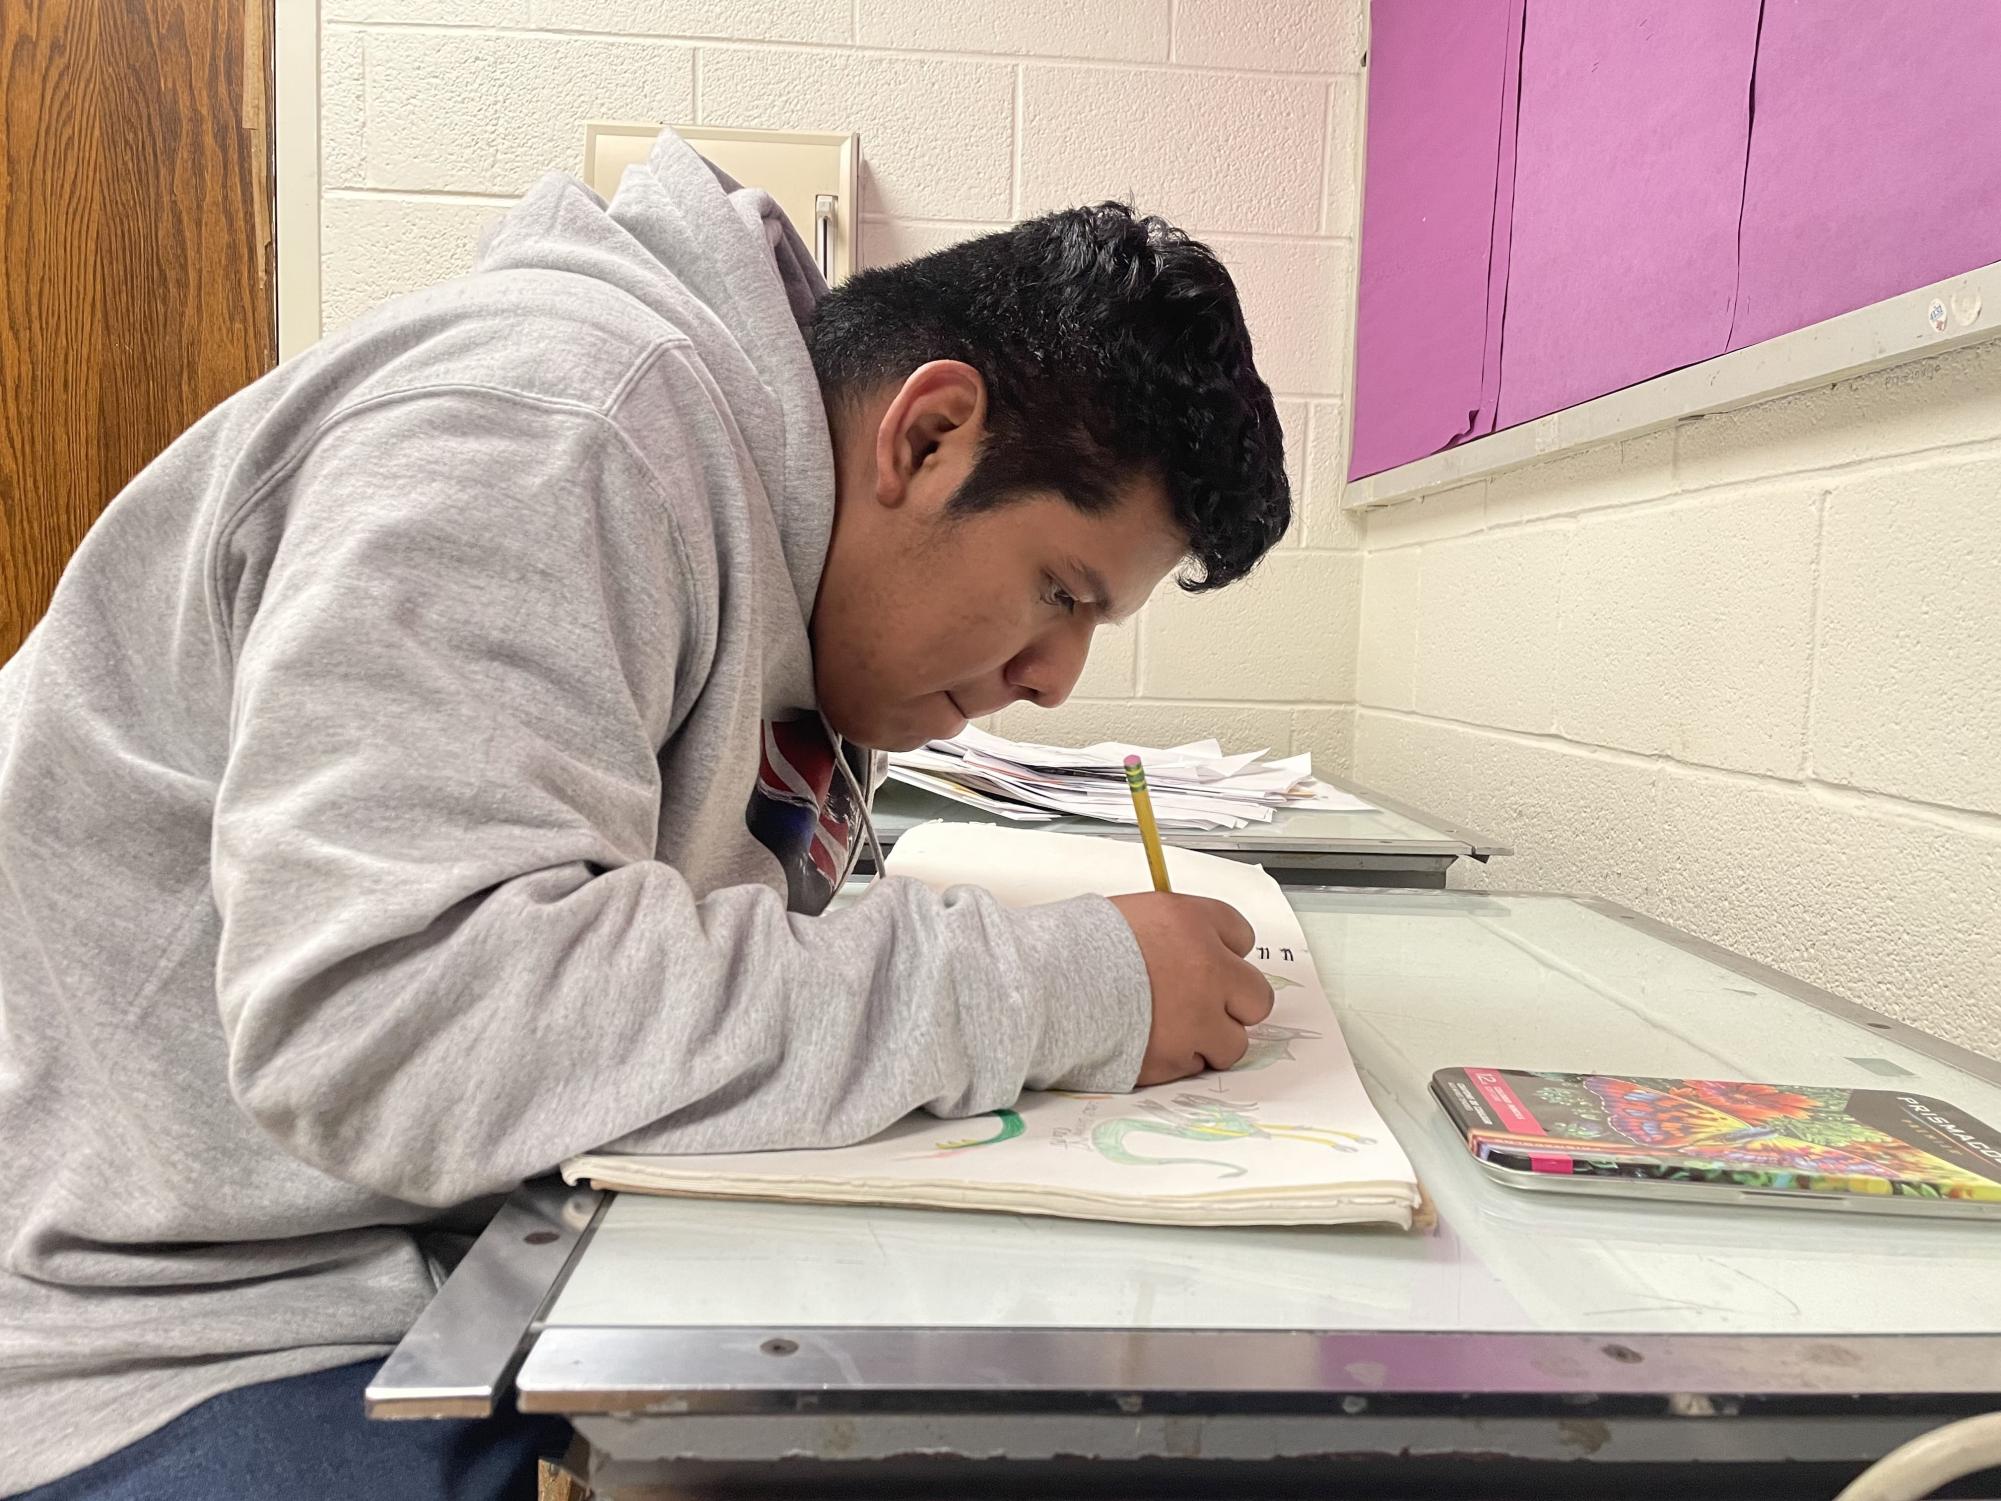 Jason Roblero Perez diligently works on his sketches. Roblero Perez has been committed to comic book creation since he first started drawing in sixth grade. 